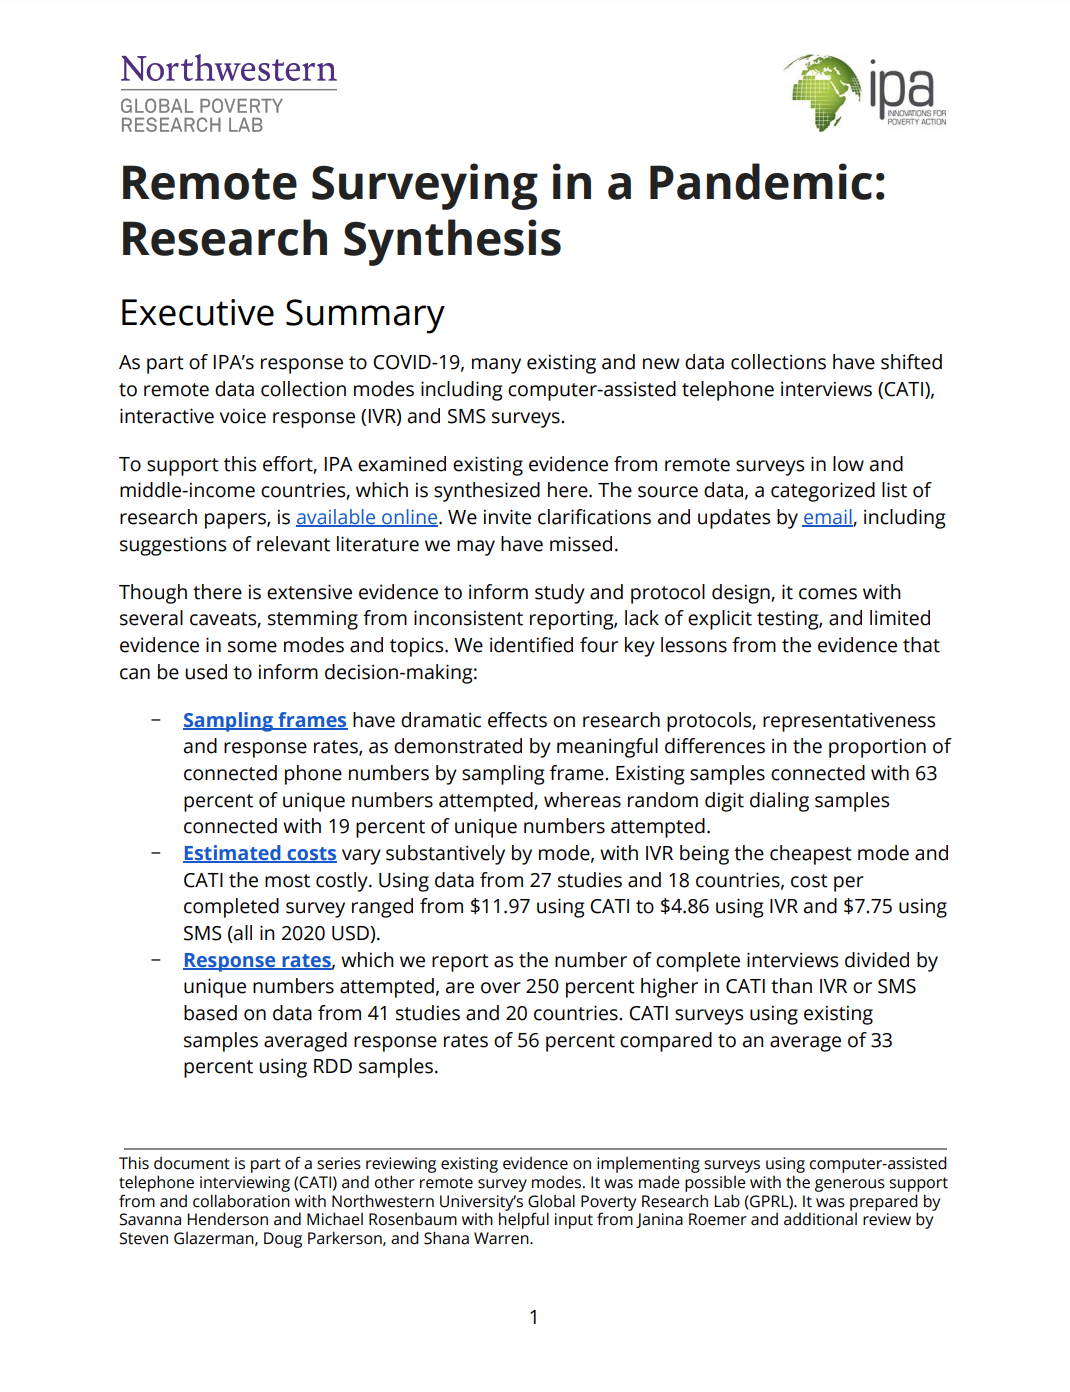 Remote Surveying in a Pandemic Research Synthesis - Image of First Page of Document